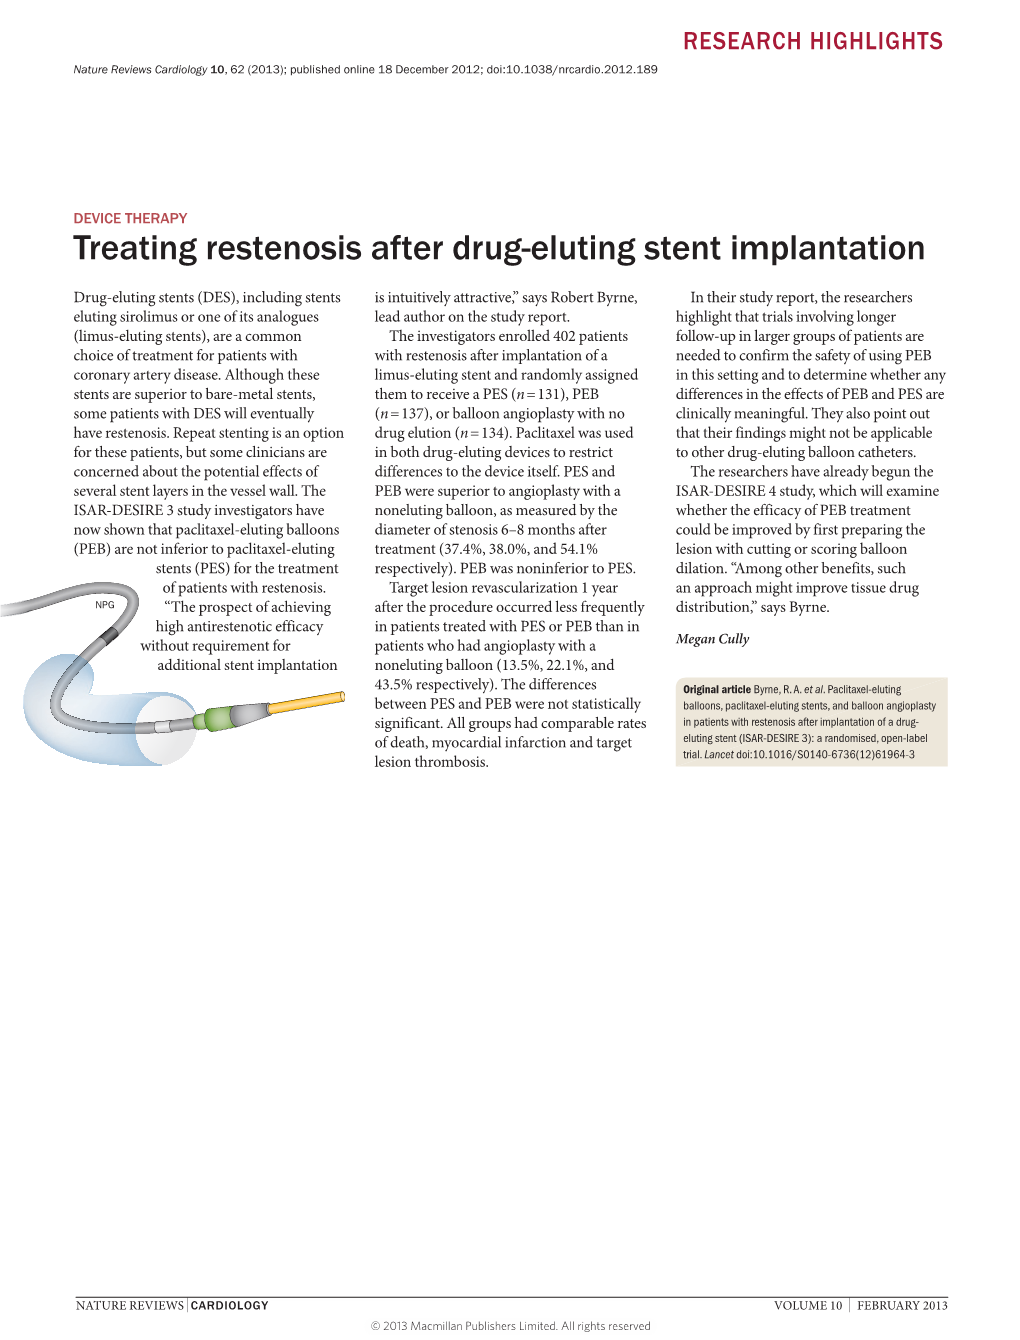 Device Therapytreating Restenosis After Drug-Eluting Stent Implantation